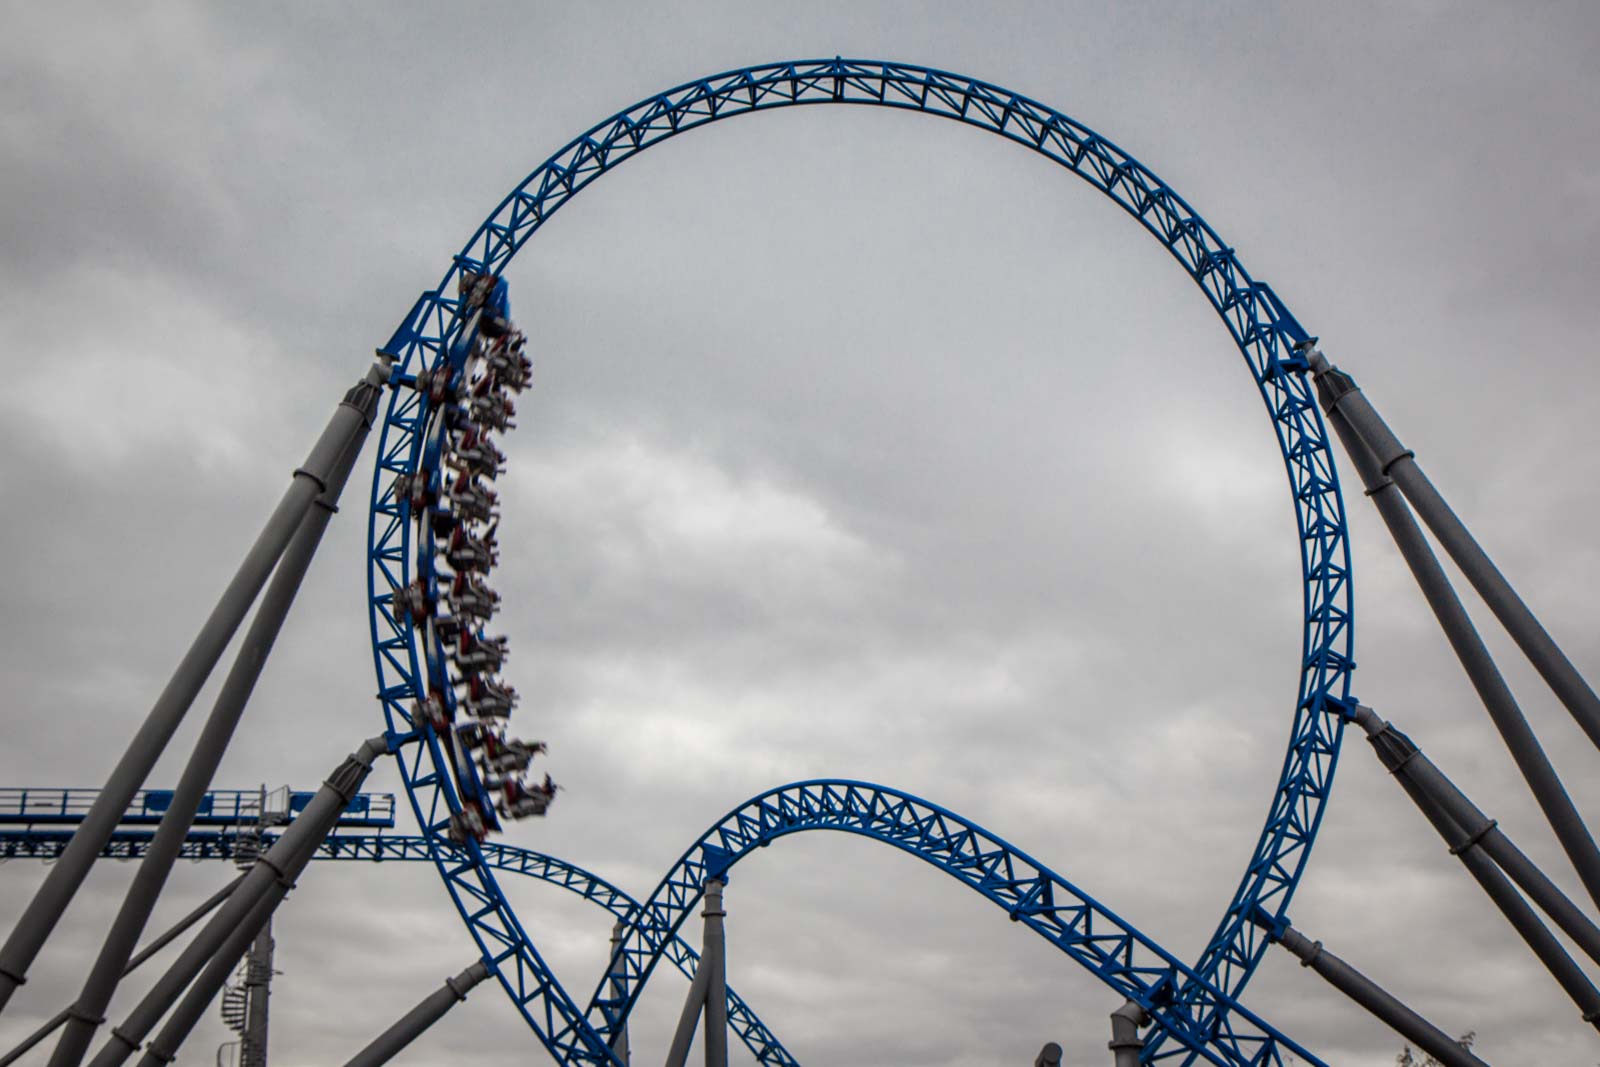 Rollercoasters at Europa Park, Germany